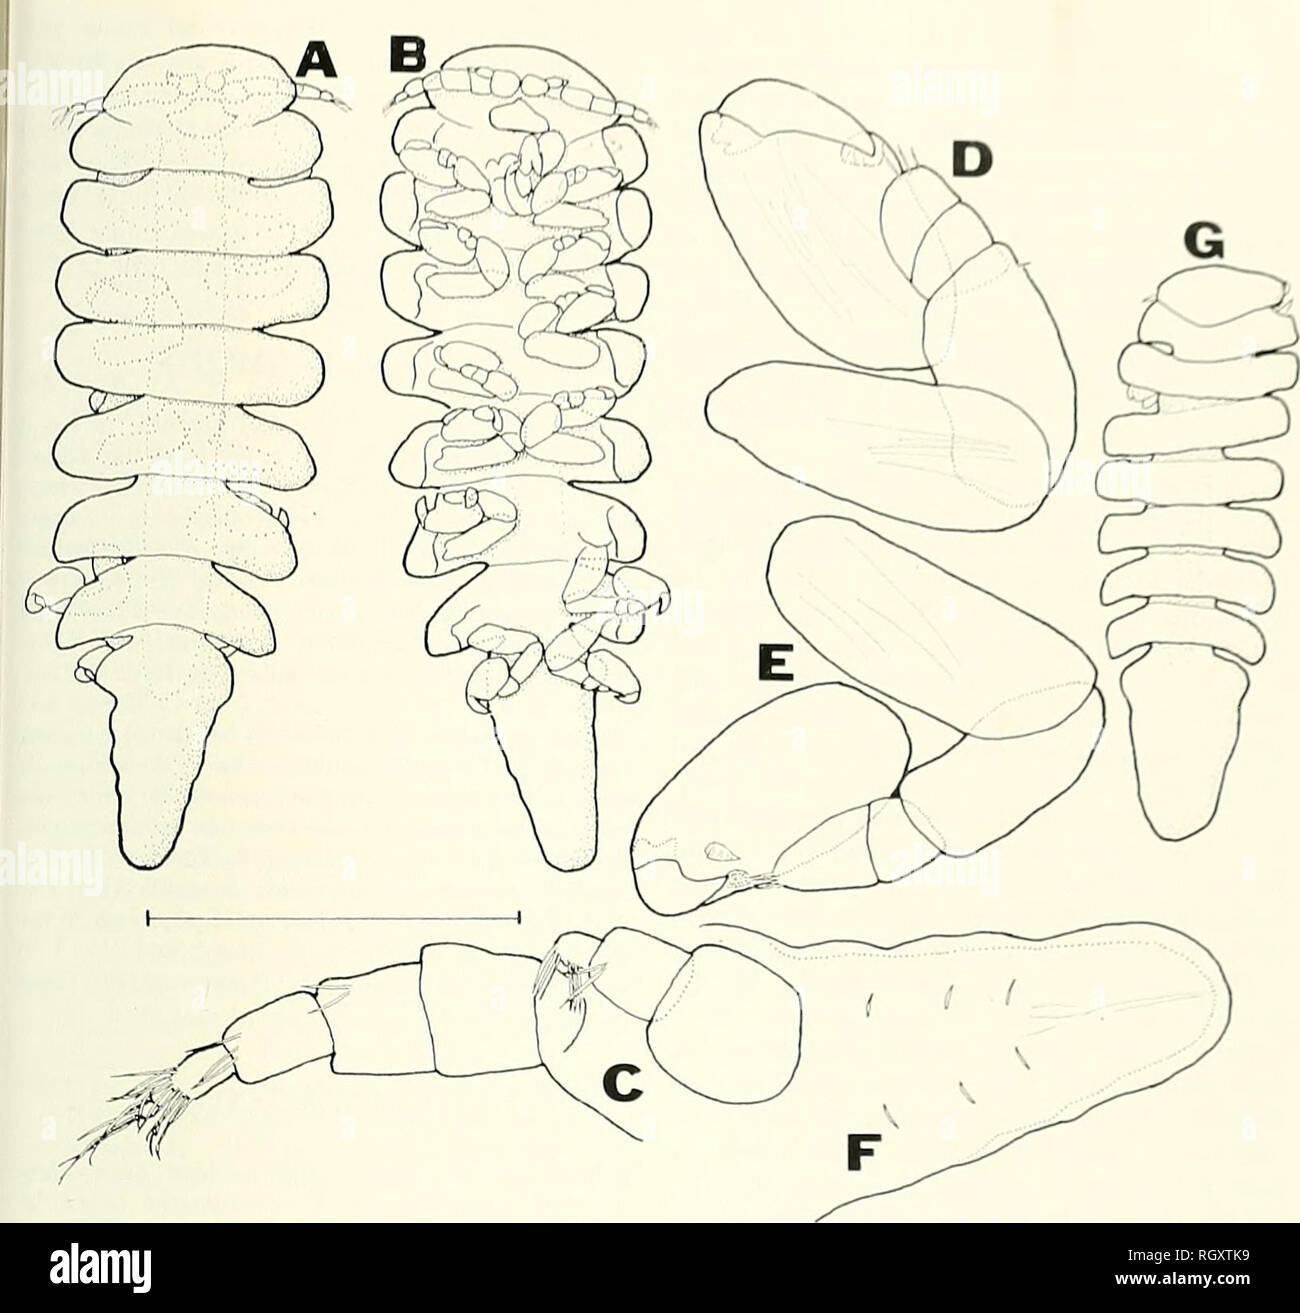 . Bulletin. Science; Natural history; Natural history. I&lt;)7-I llOI'YKIIi PARASITES AND NEW SPECIES FROM &lt; IUFOI. Figure S. Stegopluyxus hyphalus, new species. A-E. allotype male. G. second male. A. Dorsal view. B. Ventral view. C. Right antennae. D. Right pereopod 2. E. Right pereopod 7. F. Pleon. ventral view. G. Dorsal view. Scale indicates I.Omni for A. B. G. 0.2mm for C. D, E, 0.4mm for F. DISCUSSION With the description of three species of Stego- phryxus, it now becomes possible to provide a generic description, thus: Female. Body longer than broad, bent to left so right side is lon Stock Photo